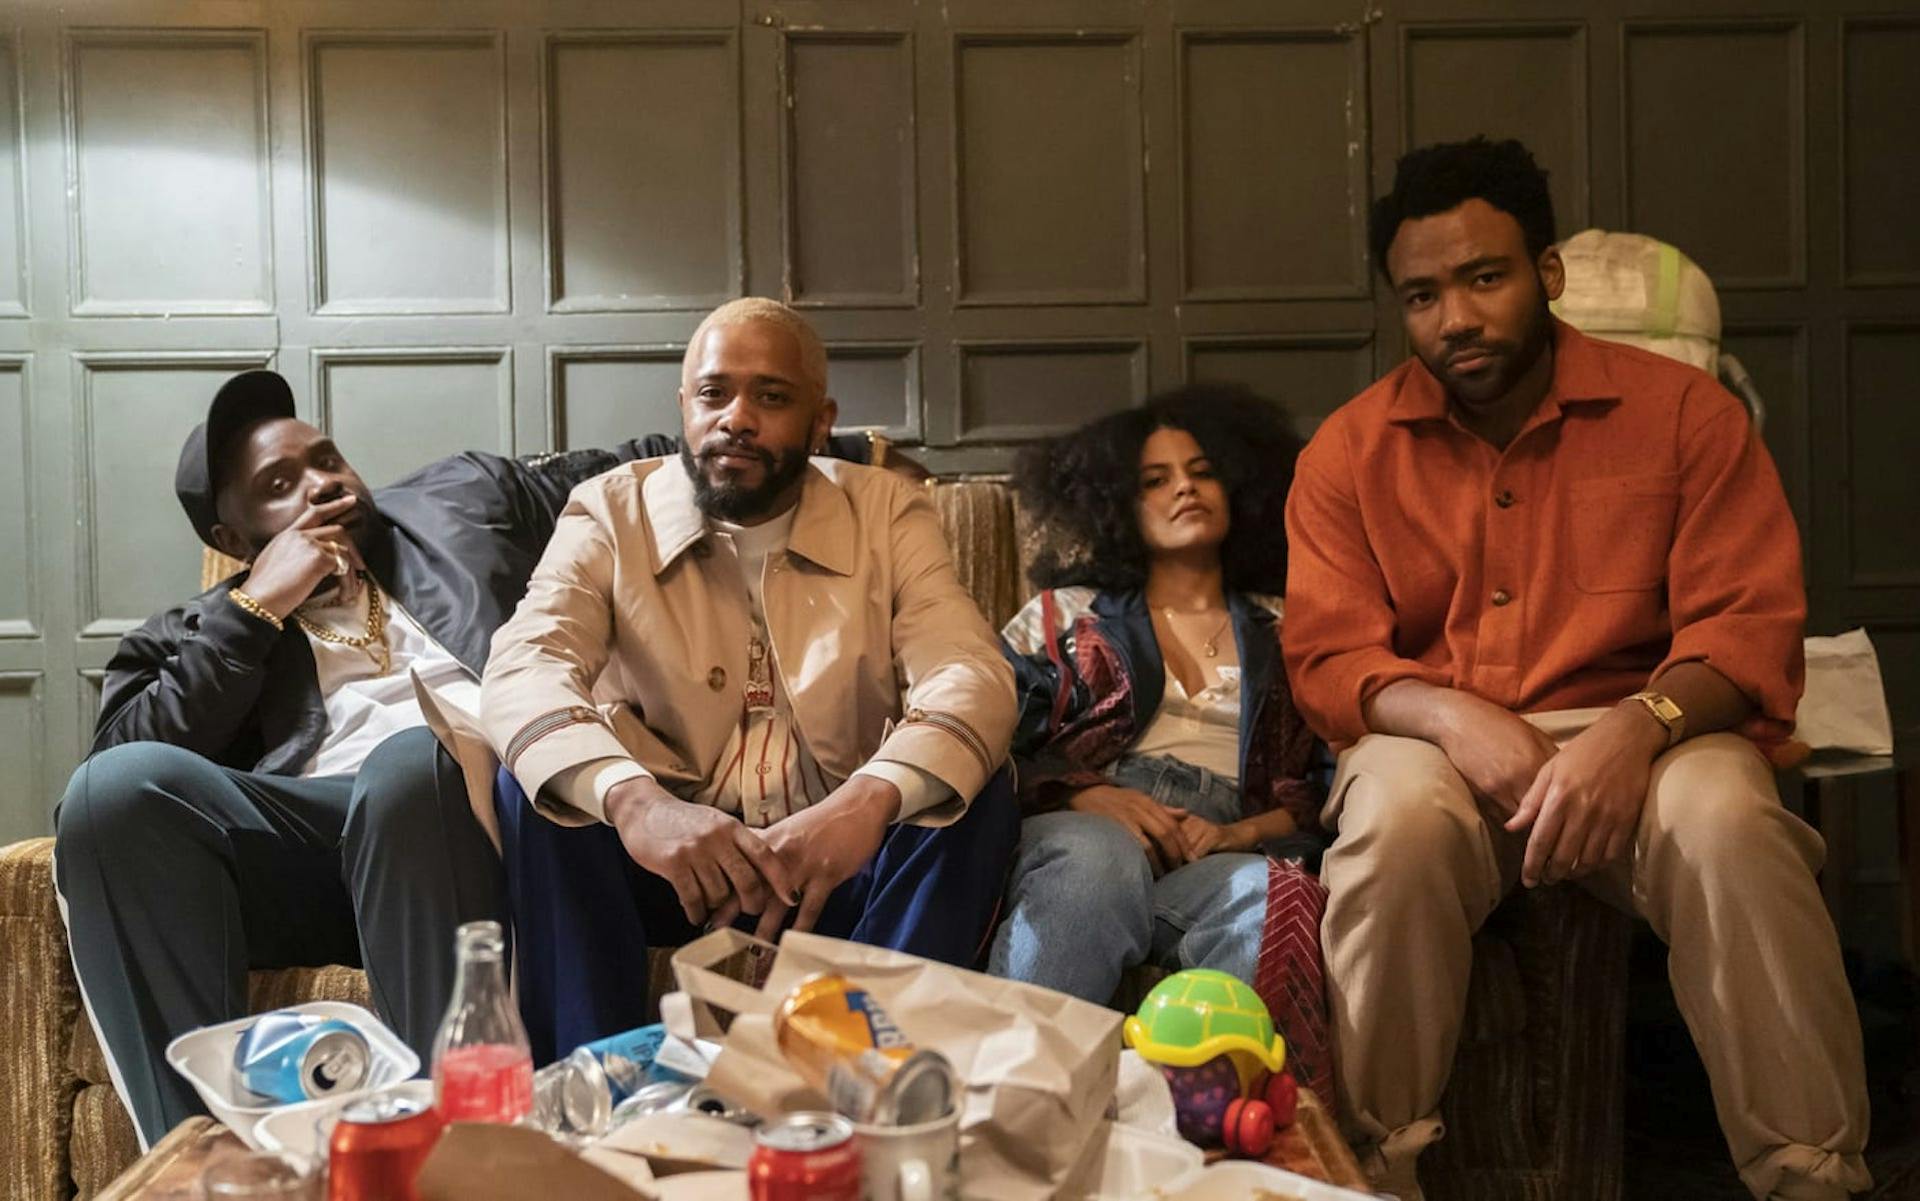 Primary cast of FX's ATLANTA (L-R) actors Bryan Tyree Henry, Lakeith Stanfield, Zazee Beatz, and Donald Glover